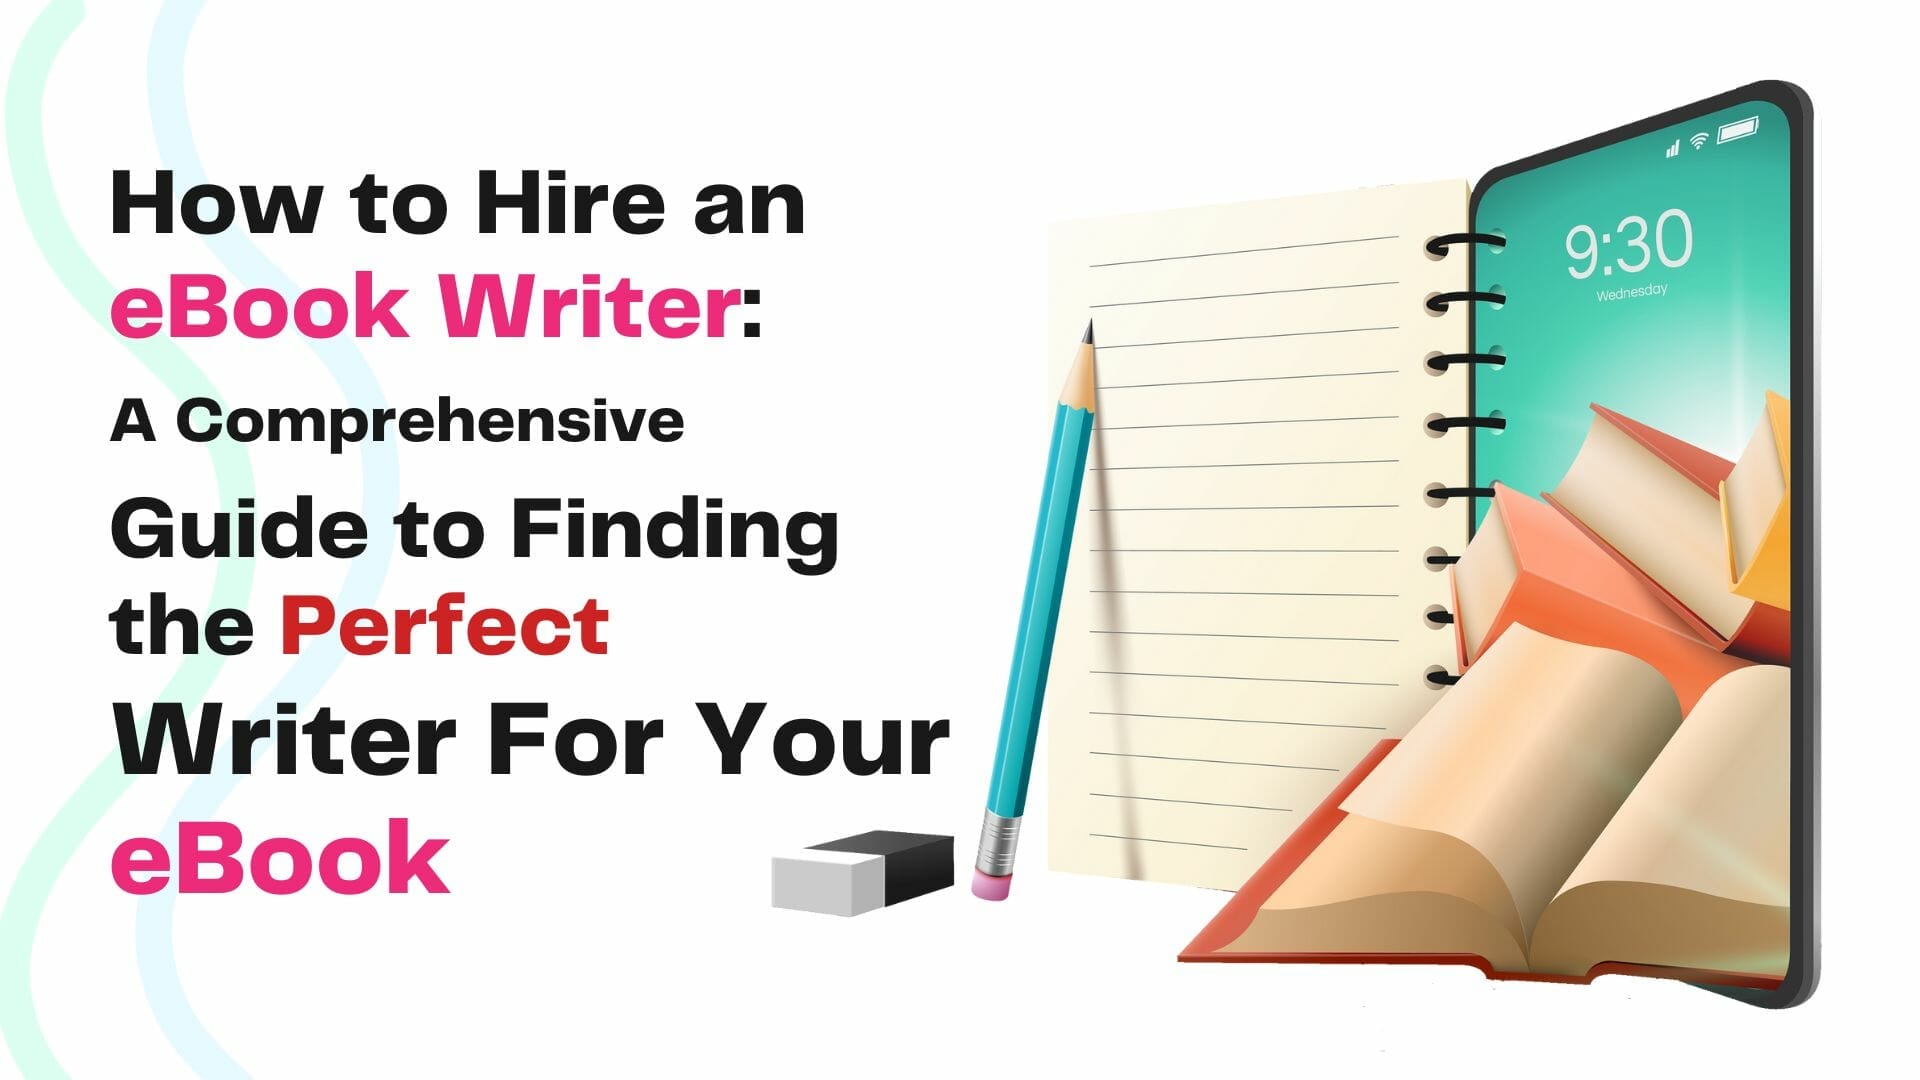 How to Hire an eBook Writer: A Comprehensive Guide to Finding the Perfect Writer For Your eBook